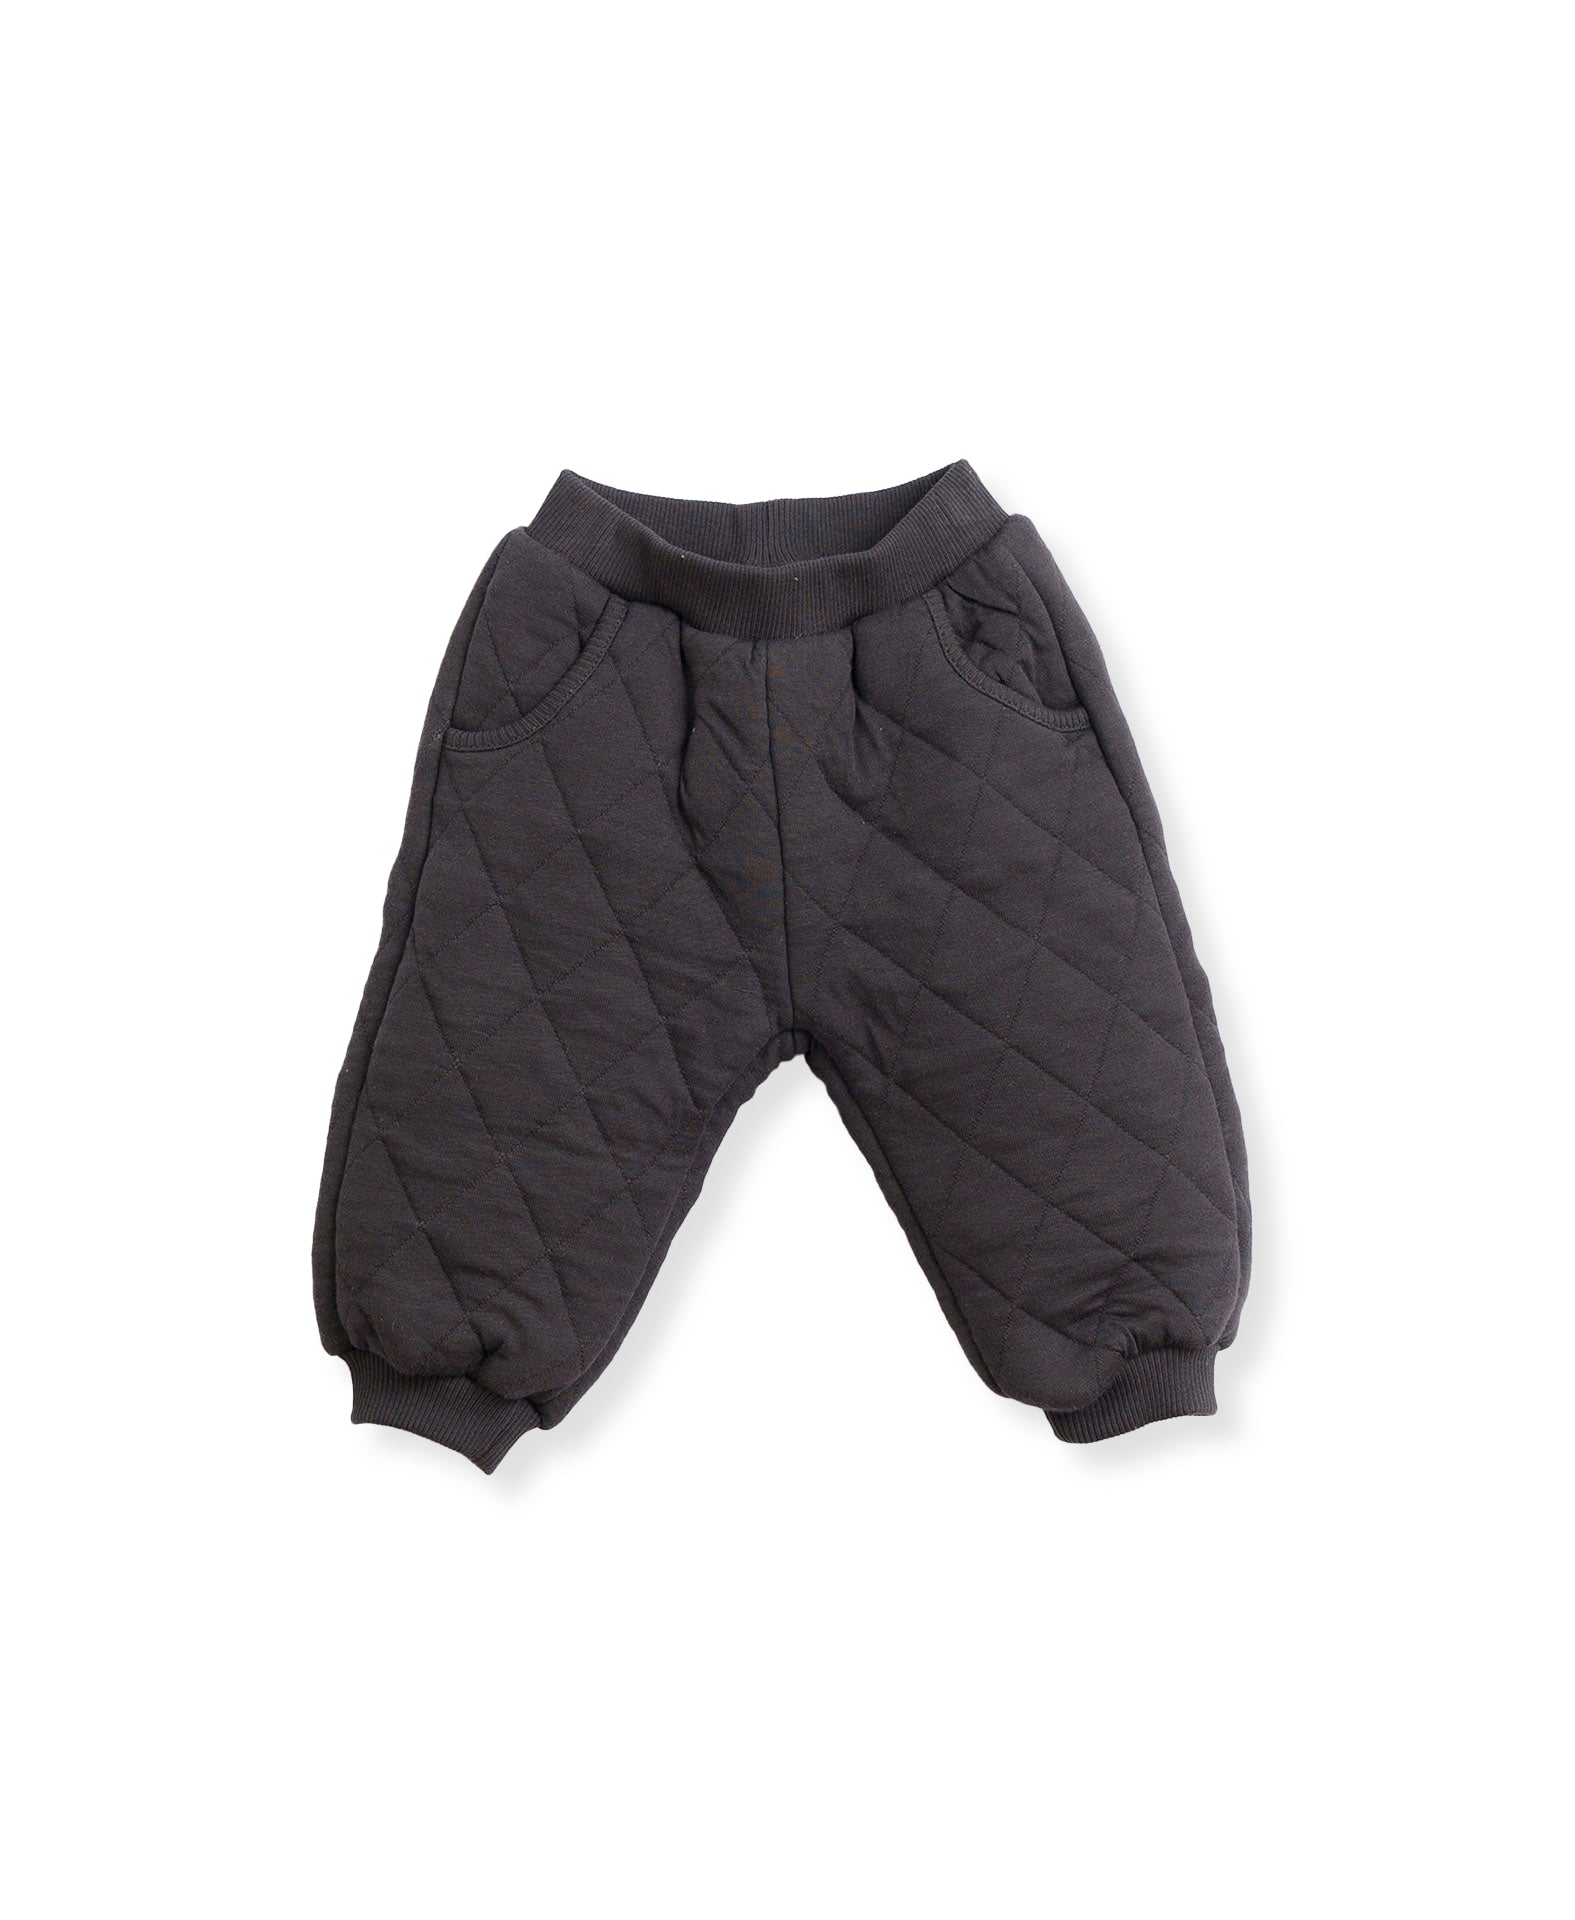 Play up padded pants chia - dark gray trousers